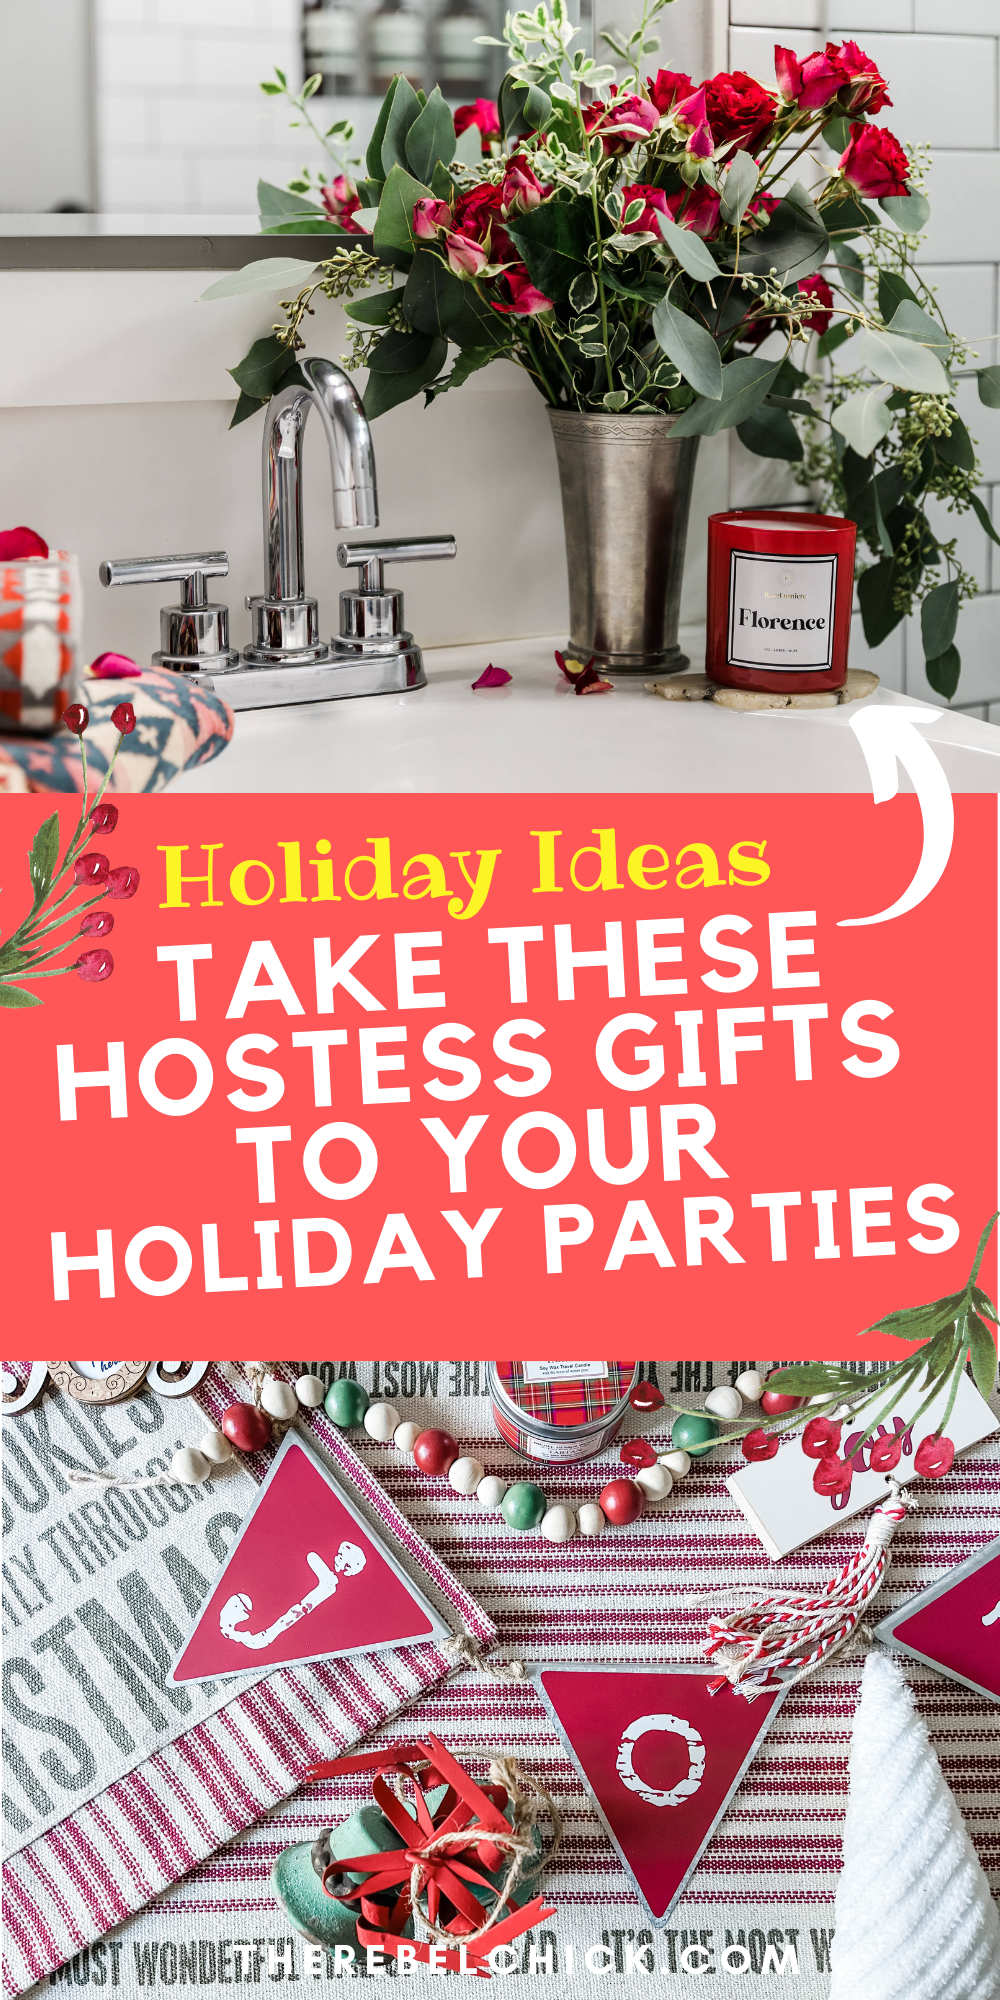 Take These Hostess Gifts to Your Holiday Parties